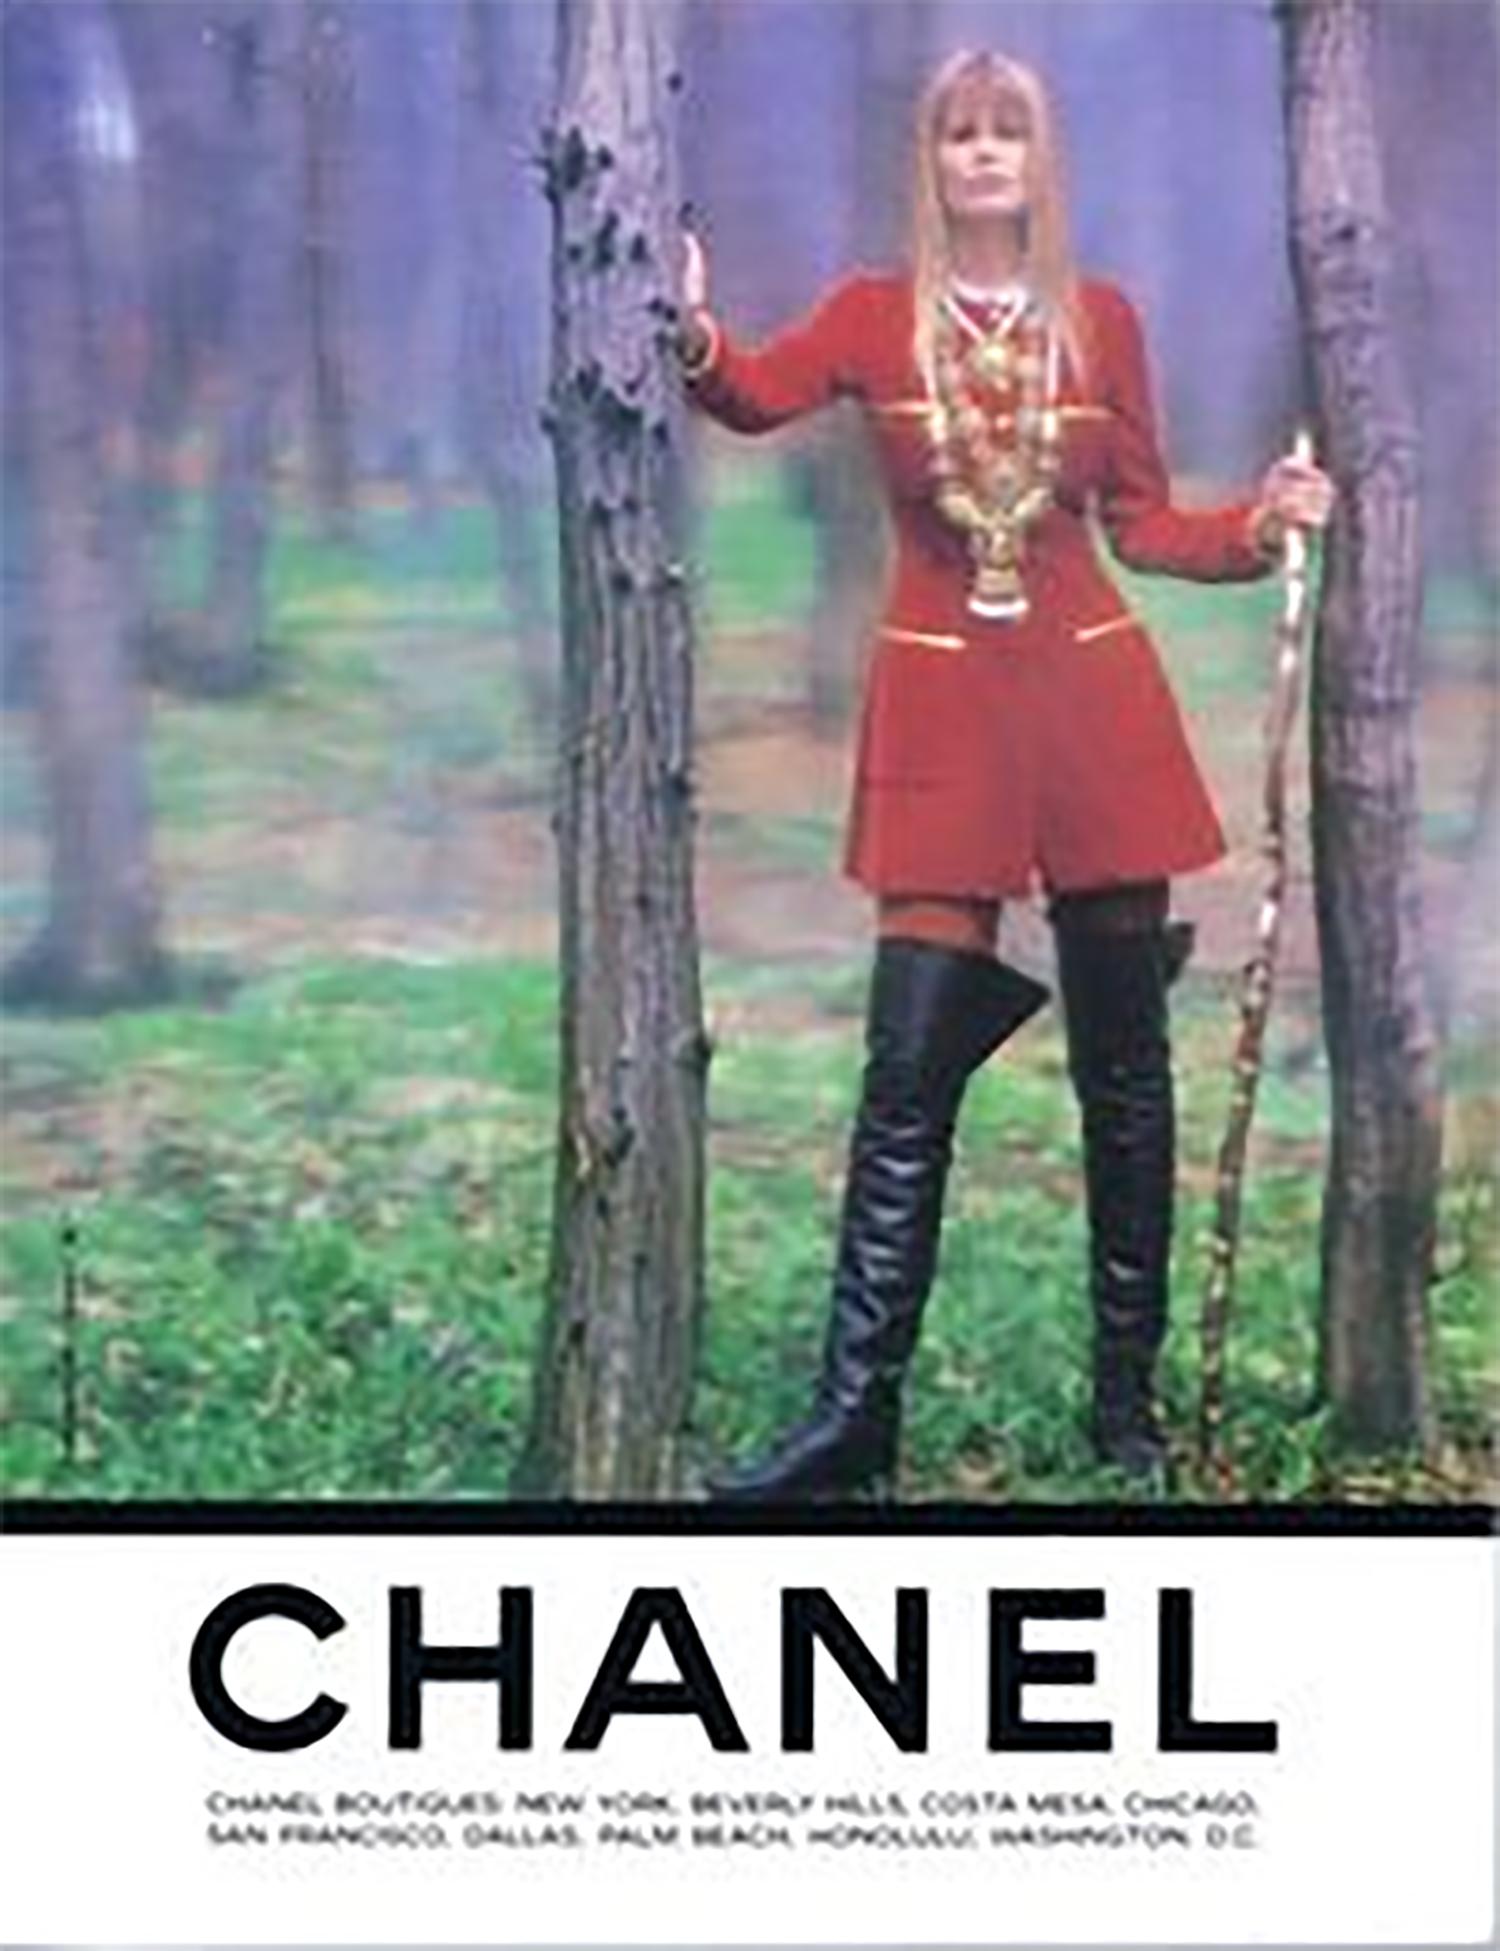 Chanel Over the knee black leather riding boots Claudia Schiffer worn 1990s 6